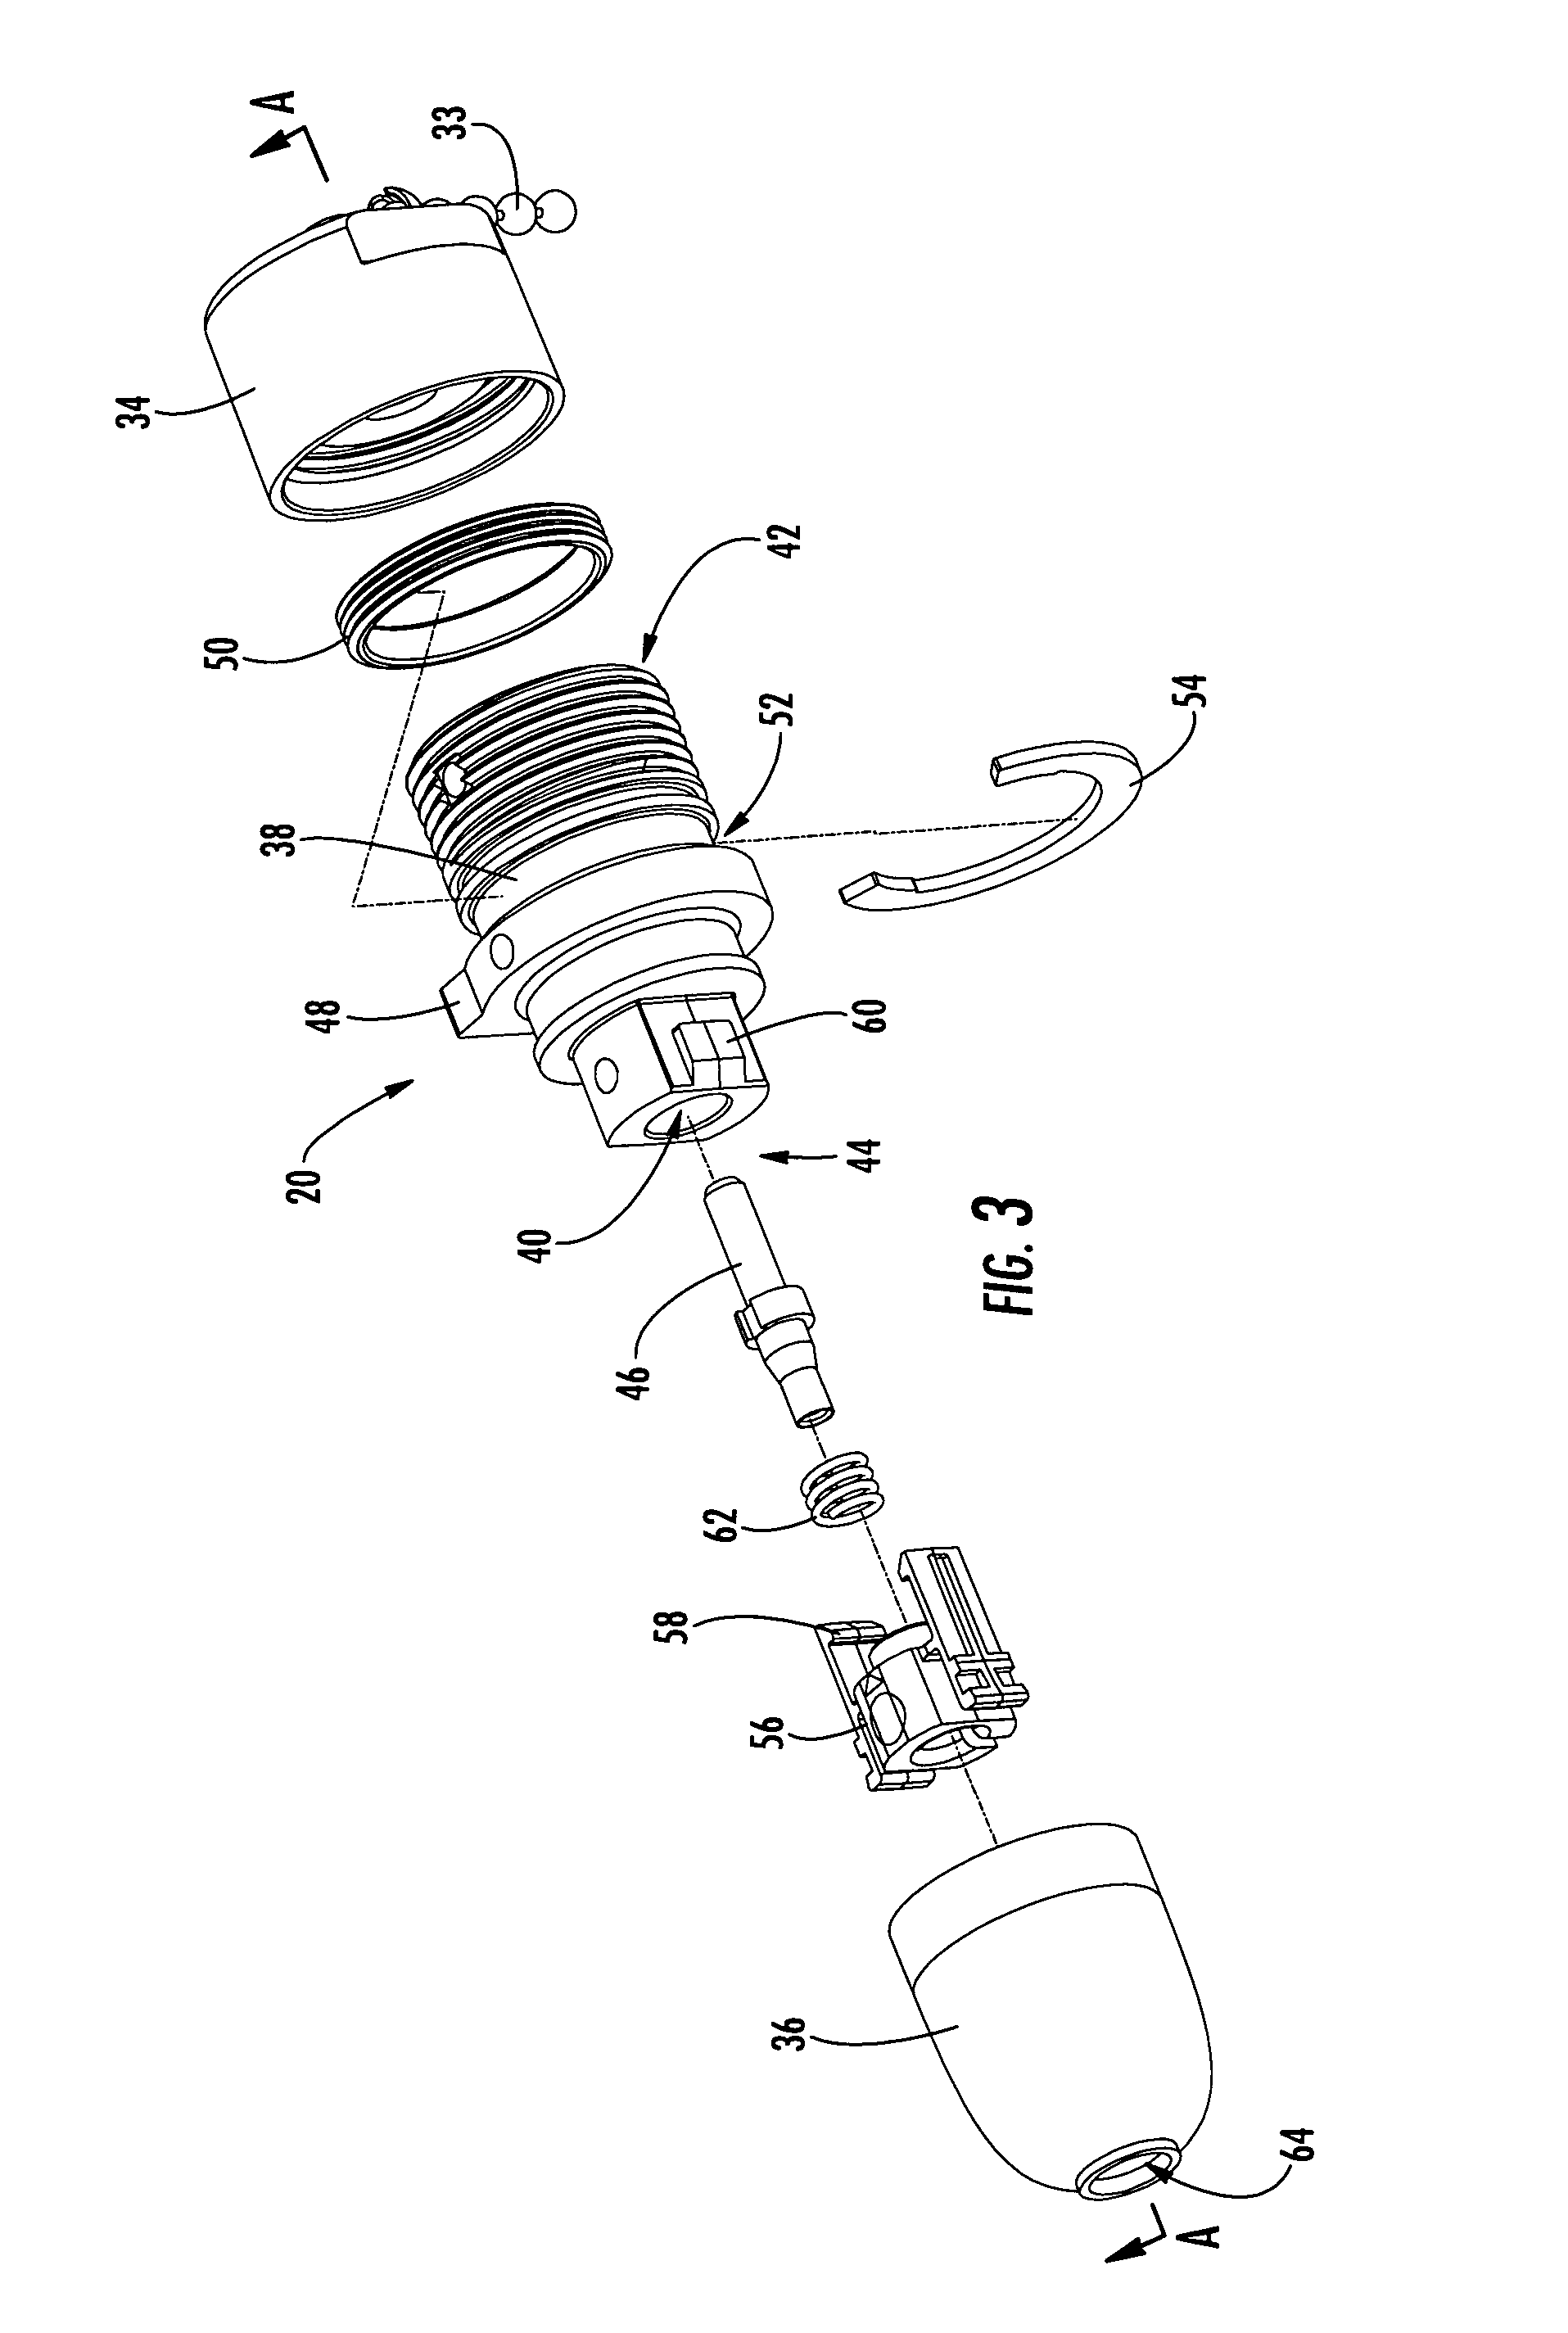 Fiber optic receptacle and plug assemblies with alignment and keying features